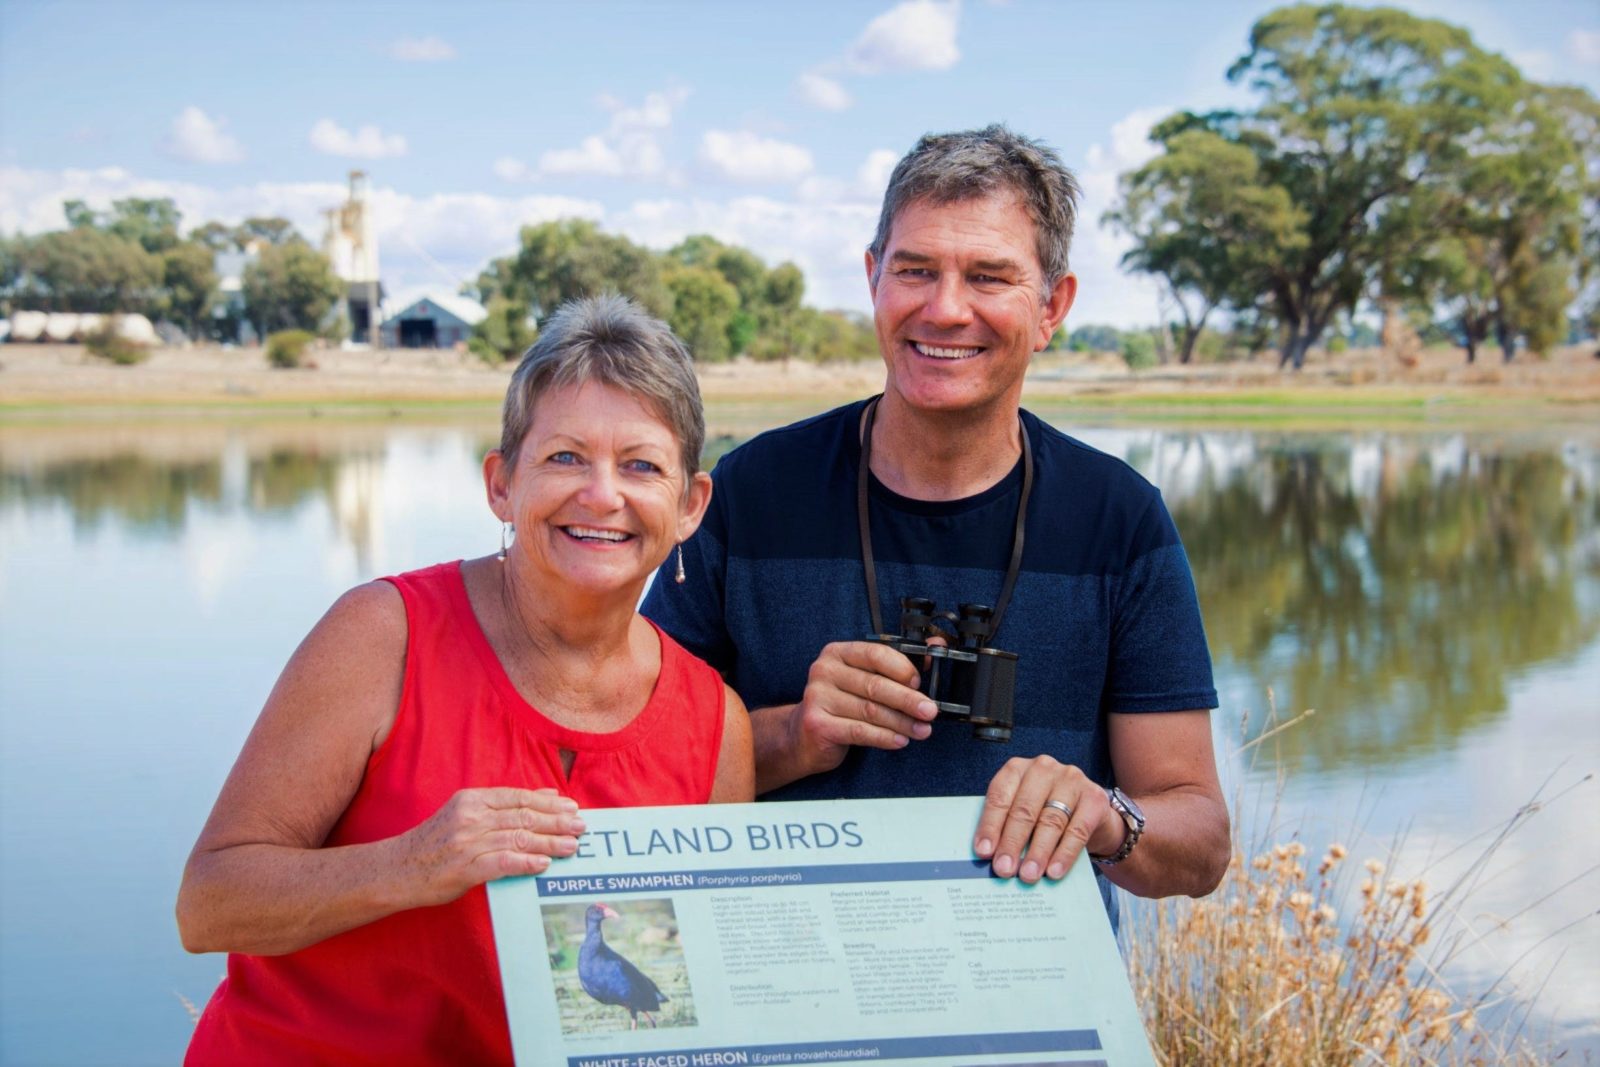 couple standing wit hthe bird life sign at the Corowa Wetlands